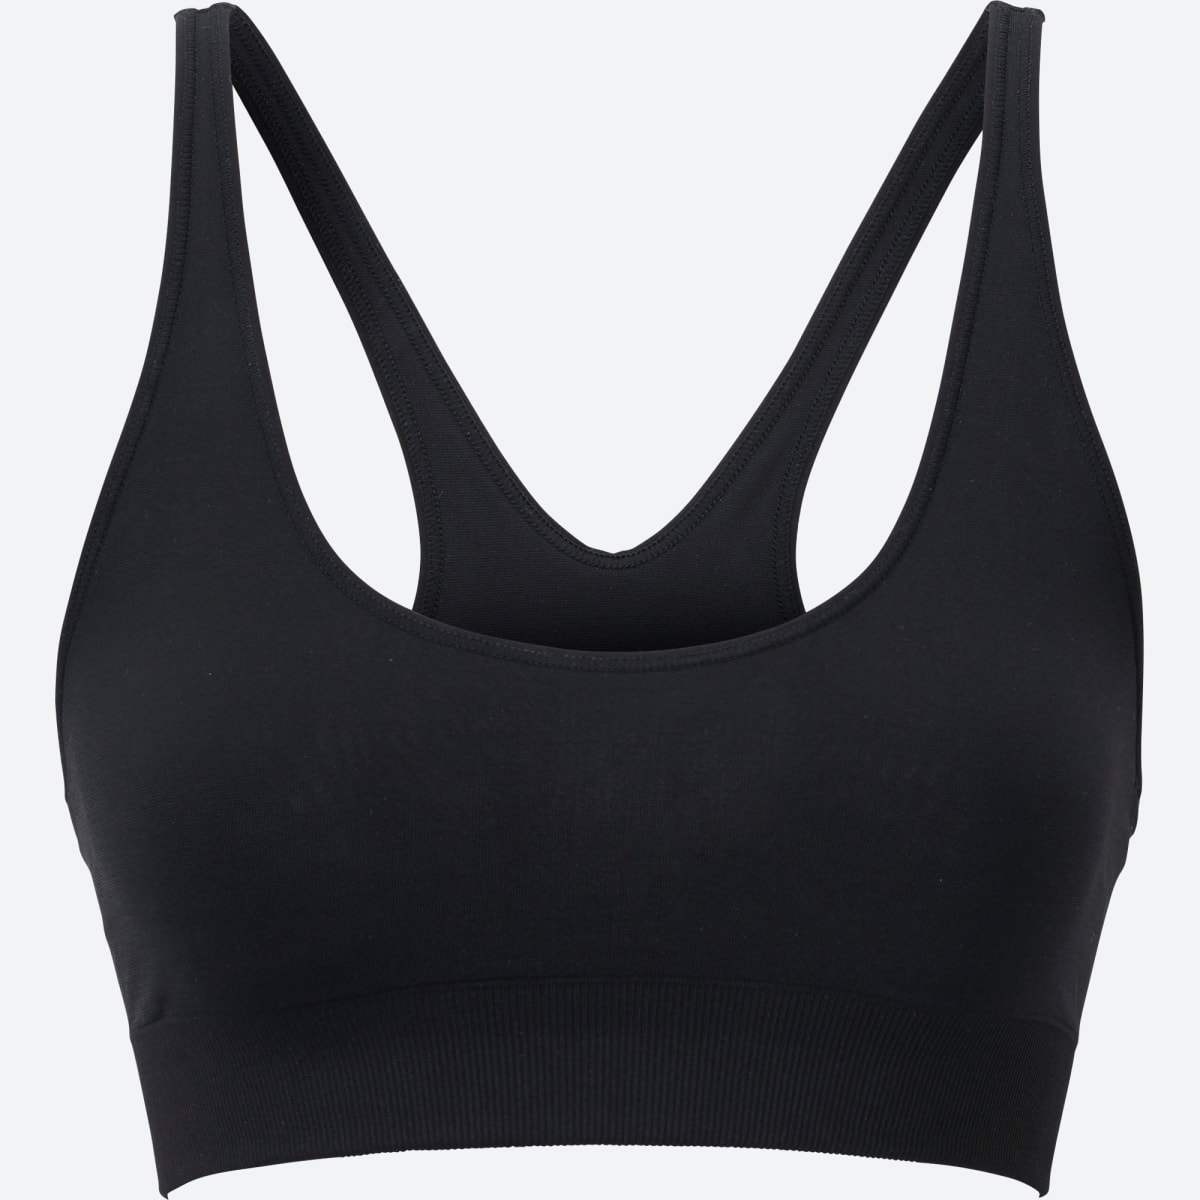 The Impossibly Lightweight Bra Alyssa Is Stocking Up on for Summer -  Fashionista